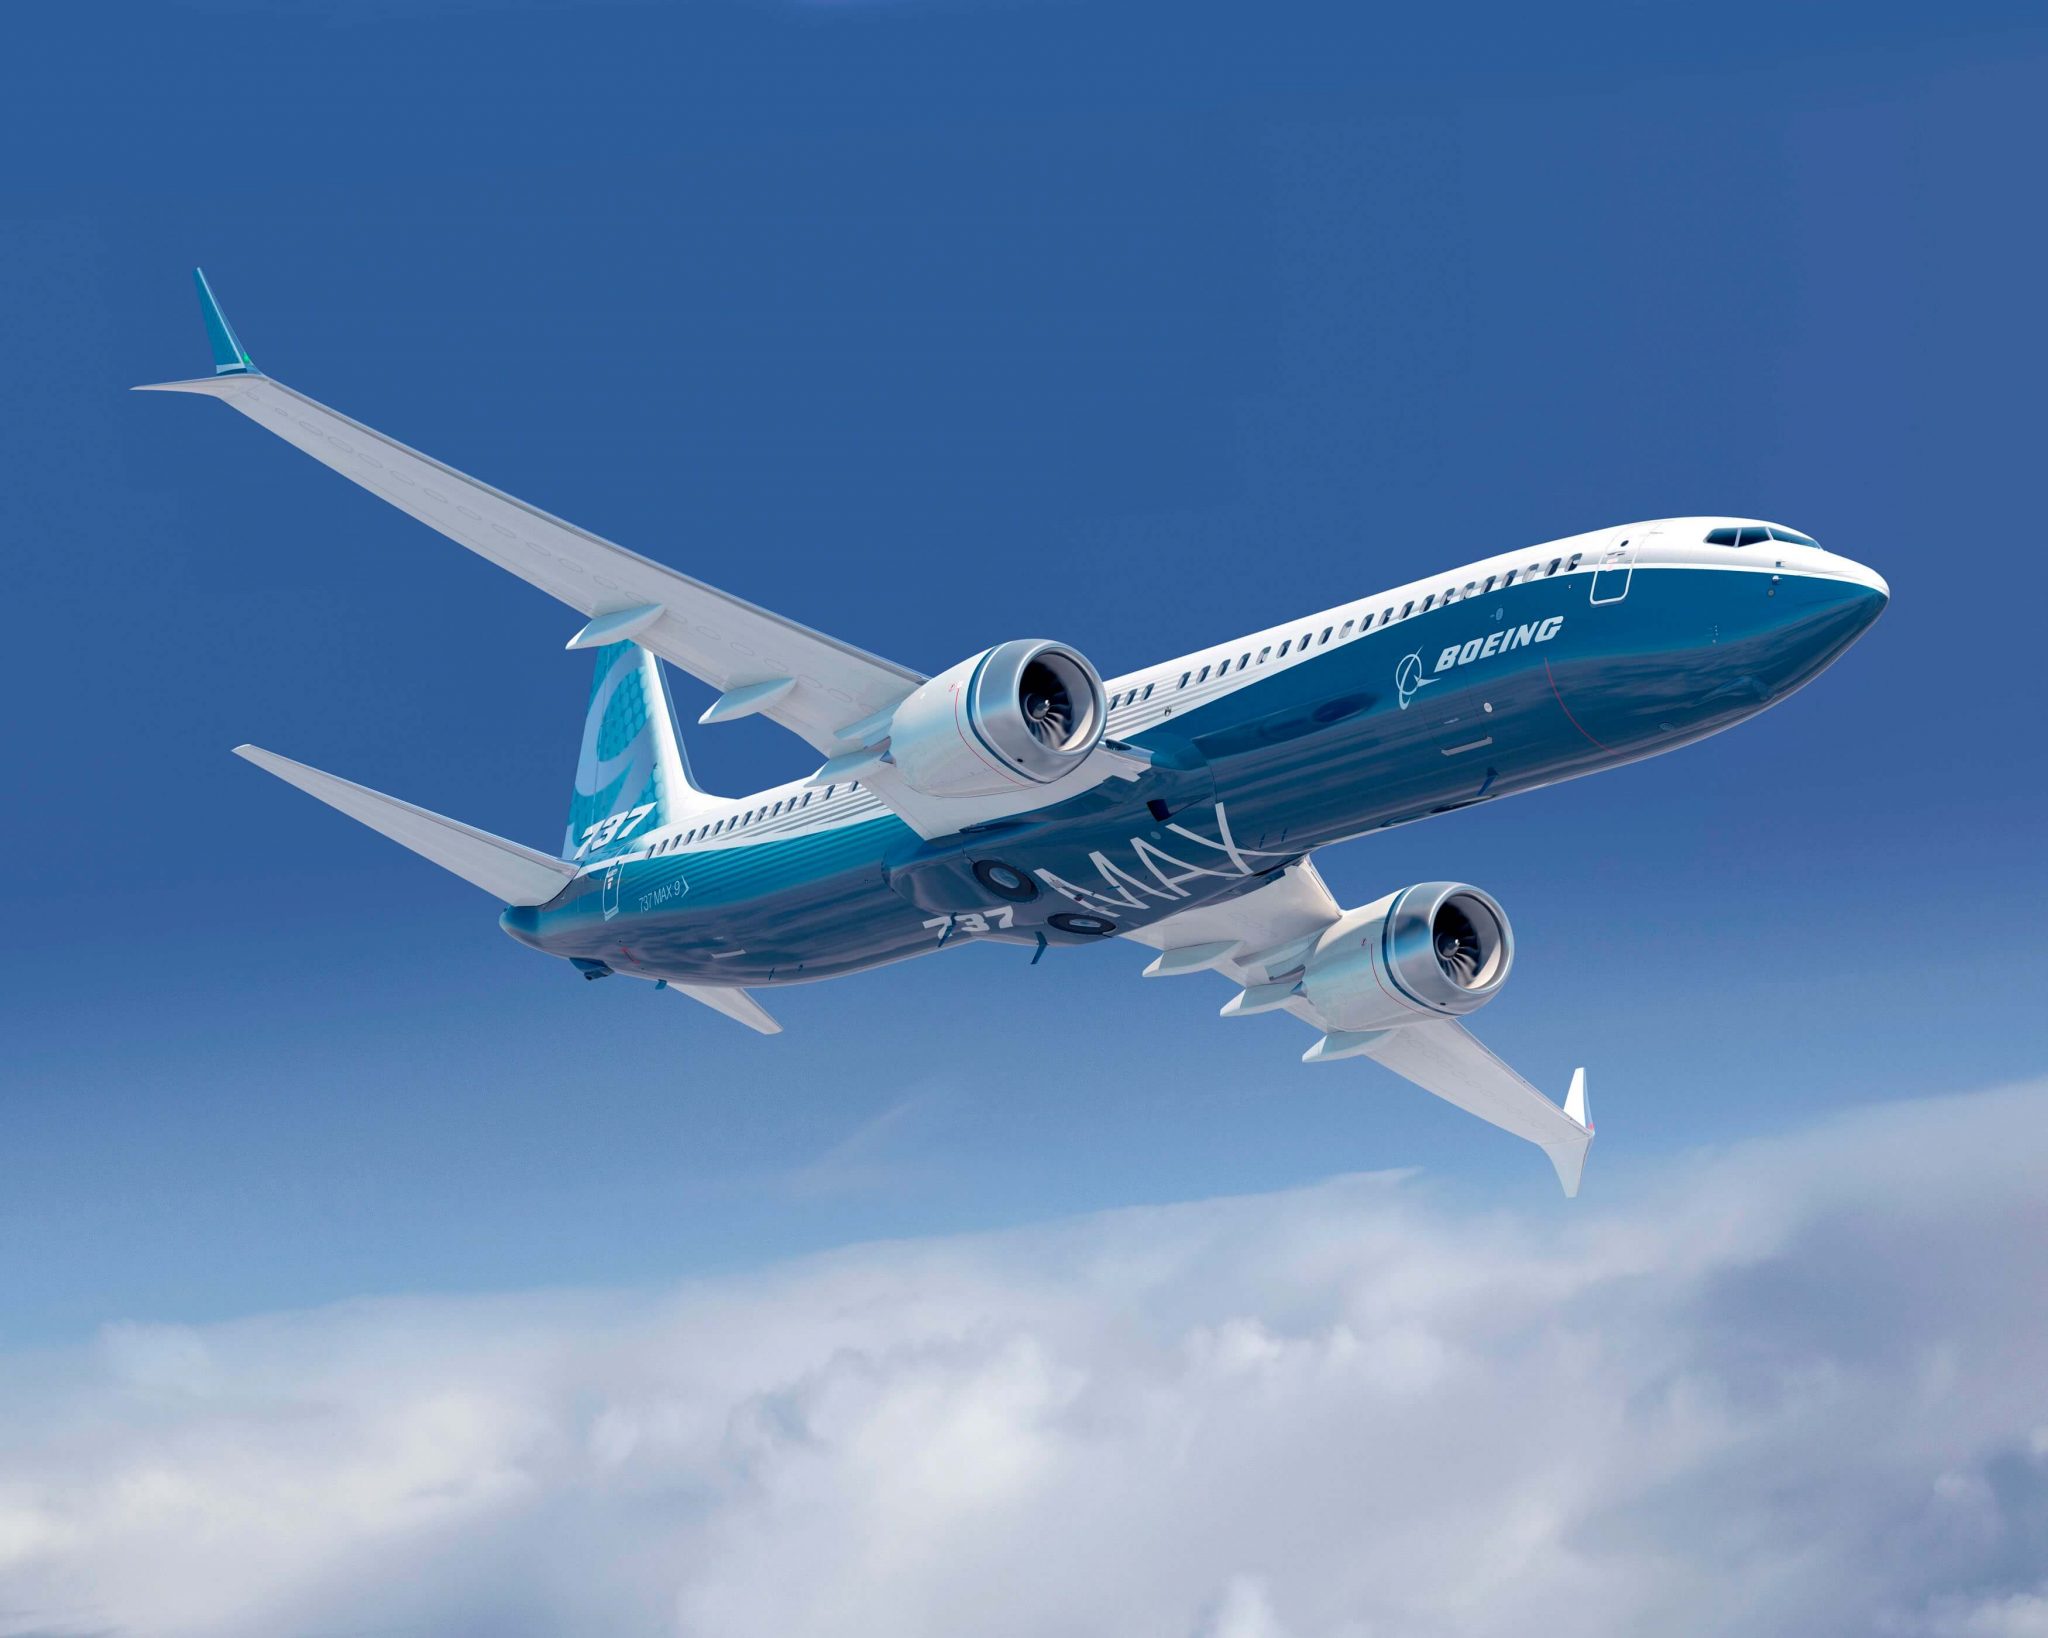 Boeing appoints special advisor to lead quality management system assessment